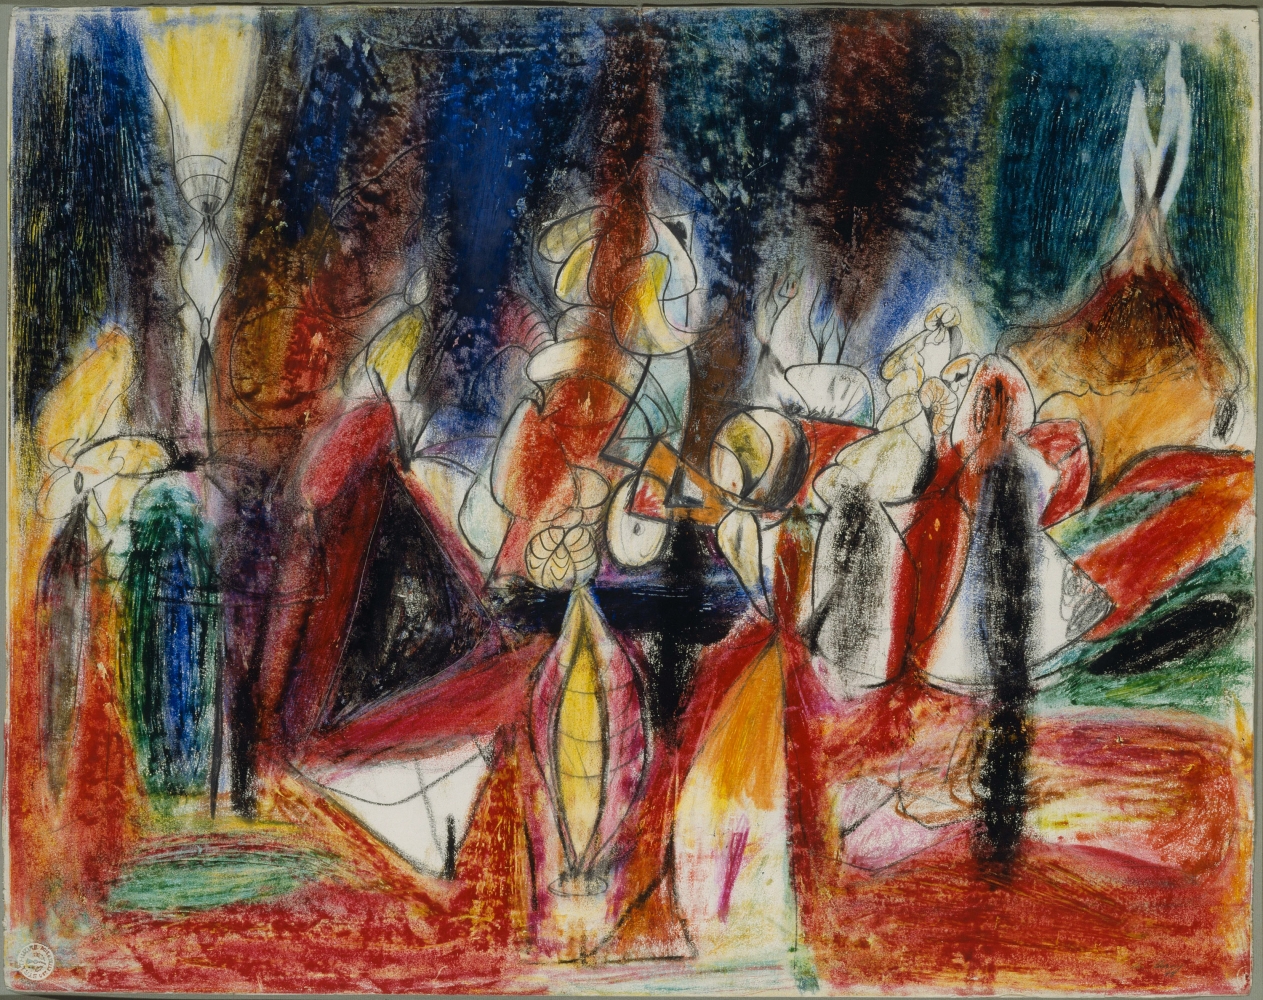 Carnival,&nbsp;1943, crayon and graphite pencil on paper,&nbsp;22 3/4 x 28 13/16 in. (57.8 x 73.2 cm).&nbsp;Art Institute of Chicago.&nbsp;Gift of Lindy Bergman (The Lindy and Edwin Bergman Collection) (1999.937). [AGCR: D1010]